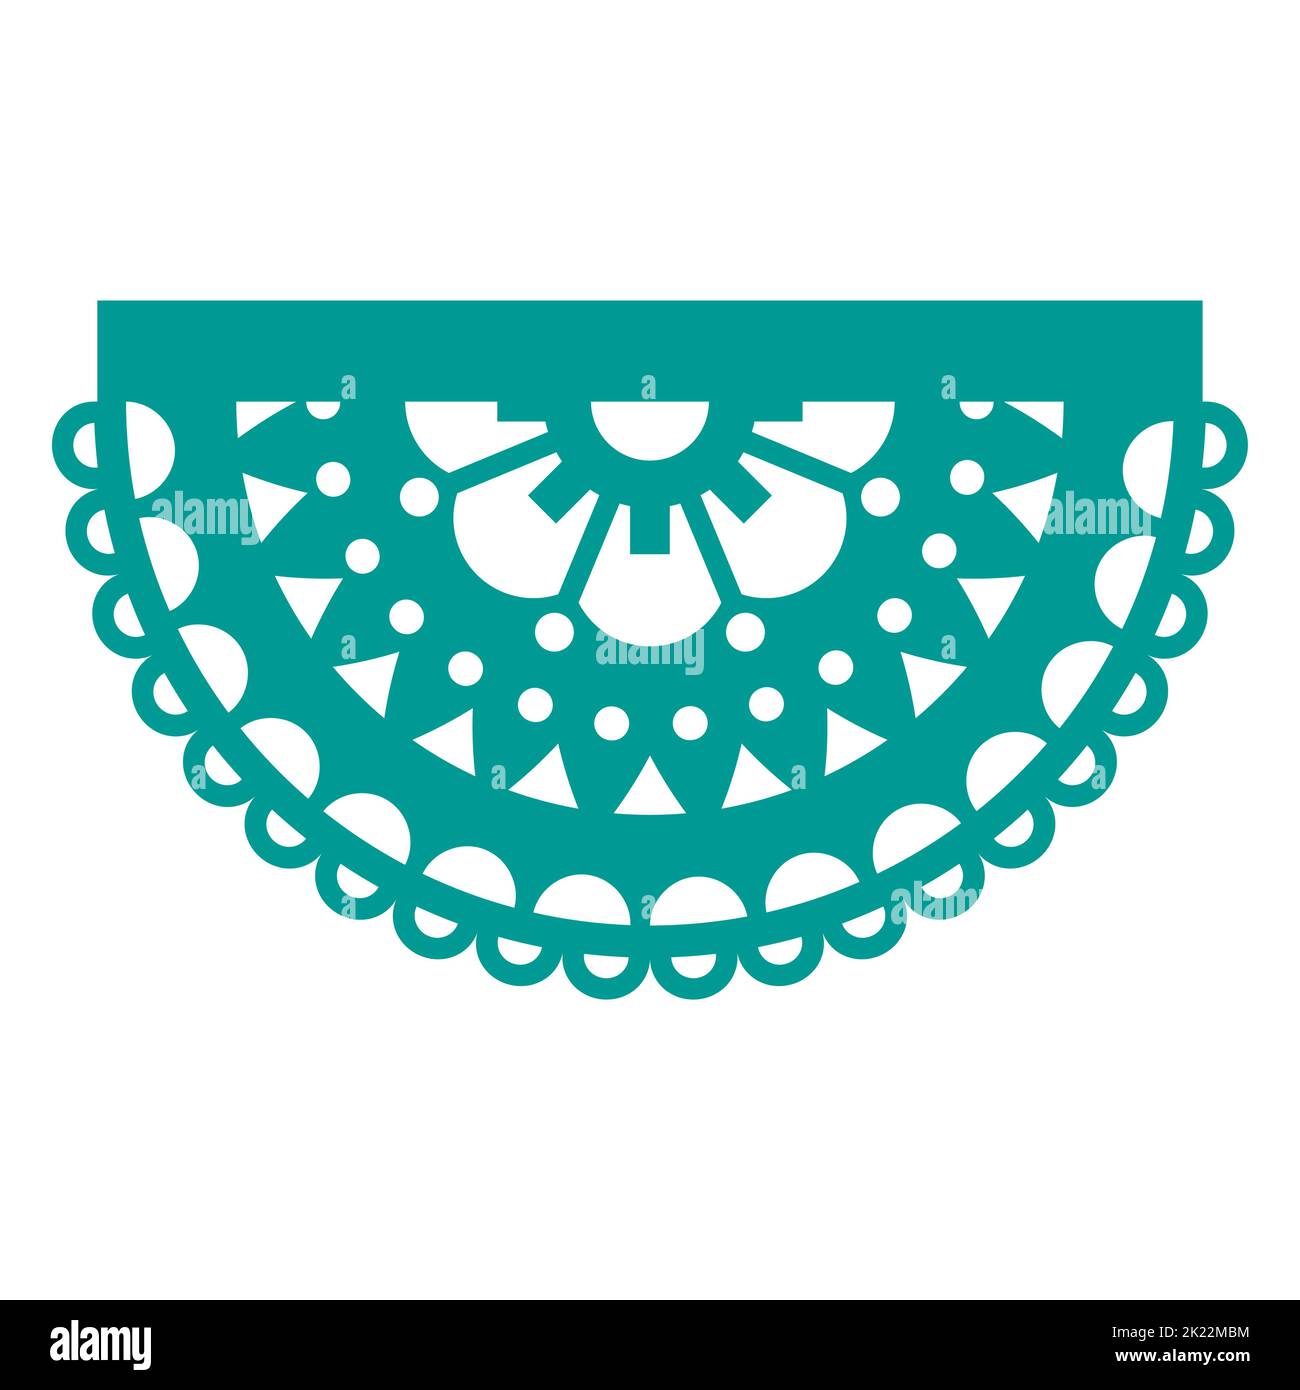 Papel Picado vector round design with decorative flowers and geometric shapes, traditional Mexican fiesta paprty decoration Stock Vector